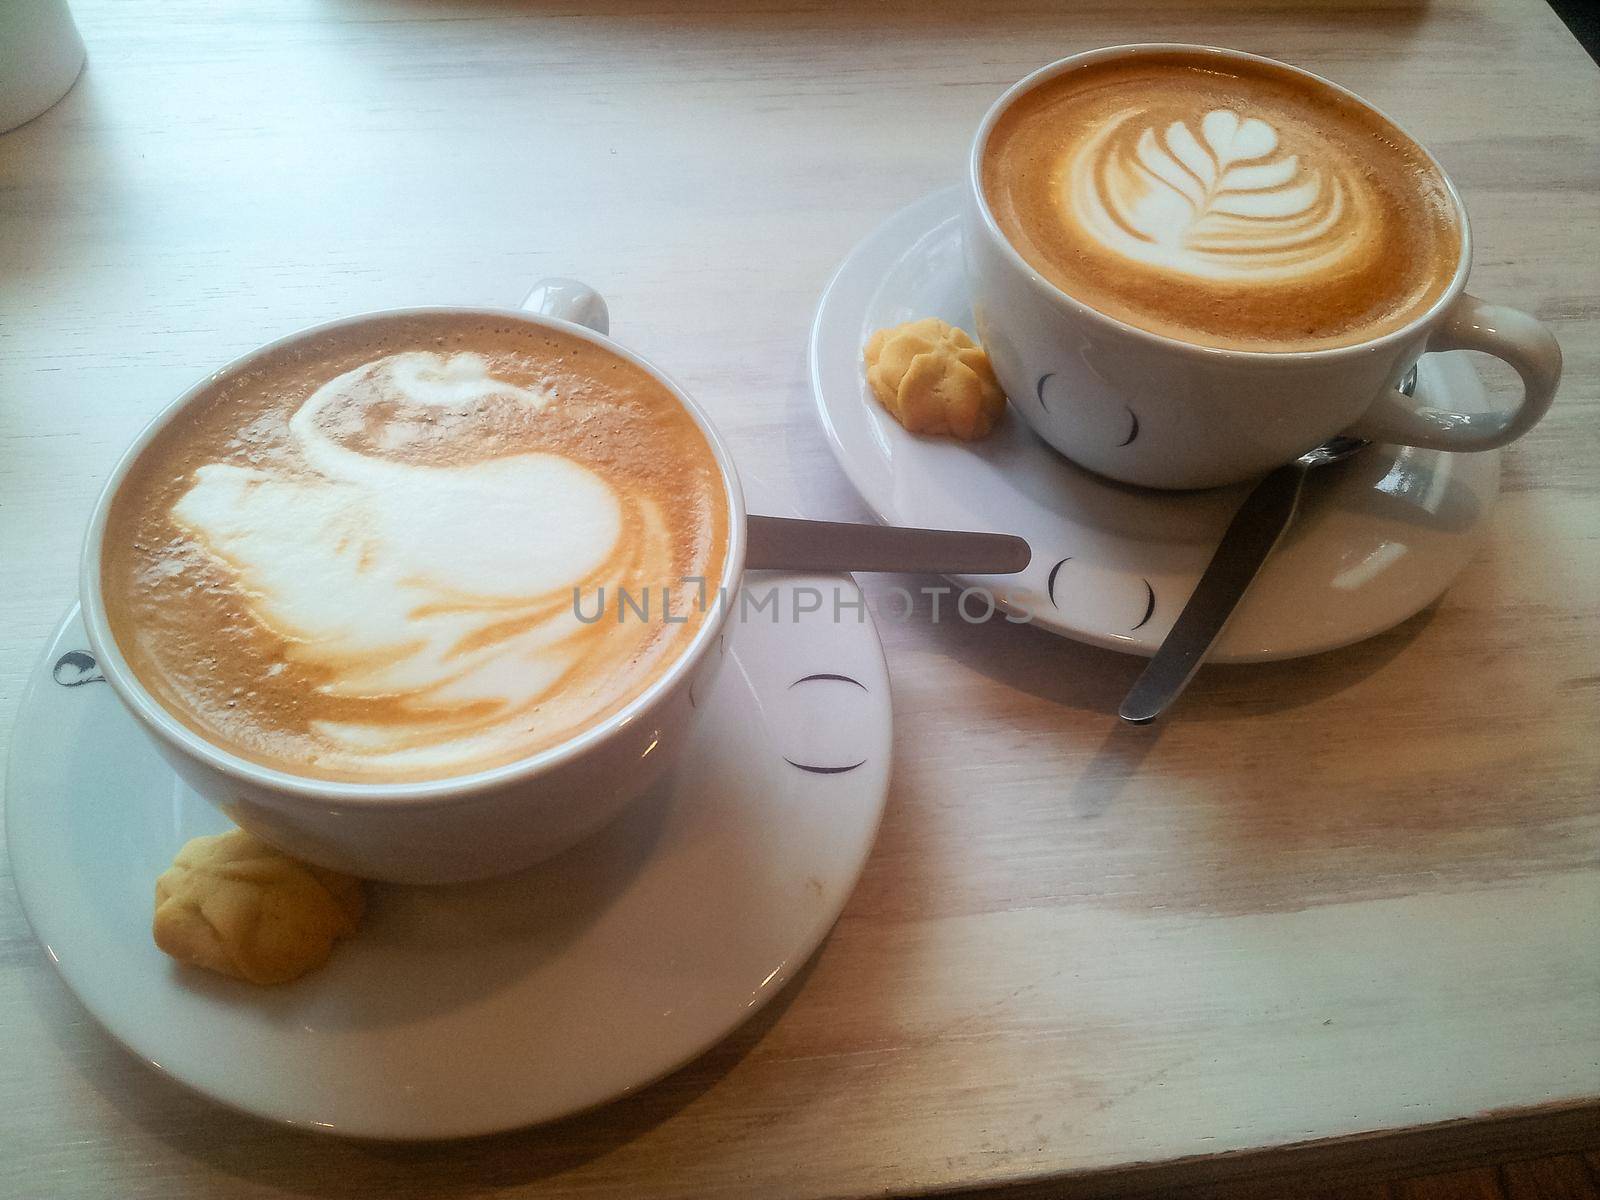 The Latte arts coffee. Coffee arts. Two hot coffee set in a white cup on desk or table. by Peruphotoart